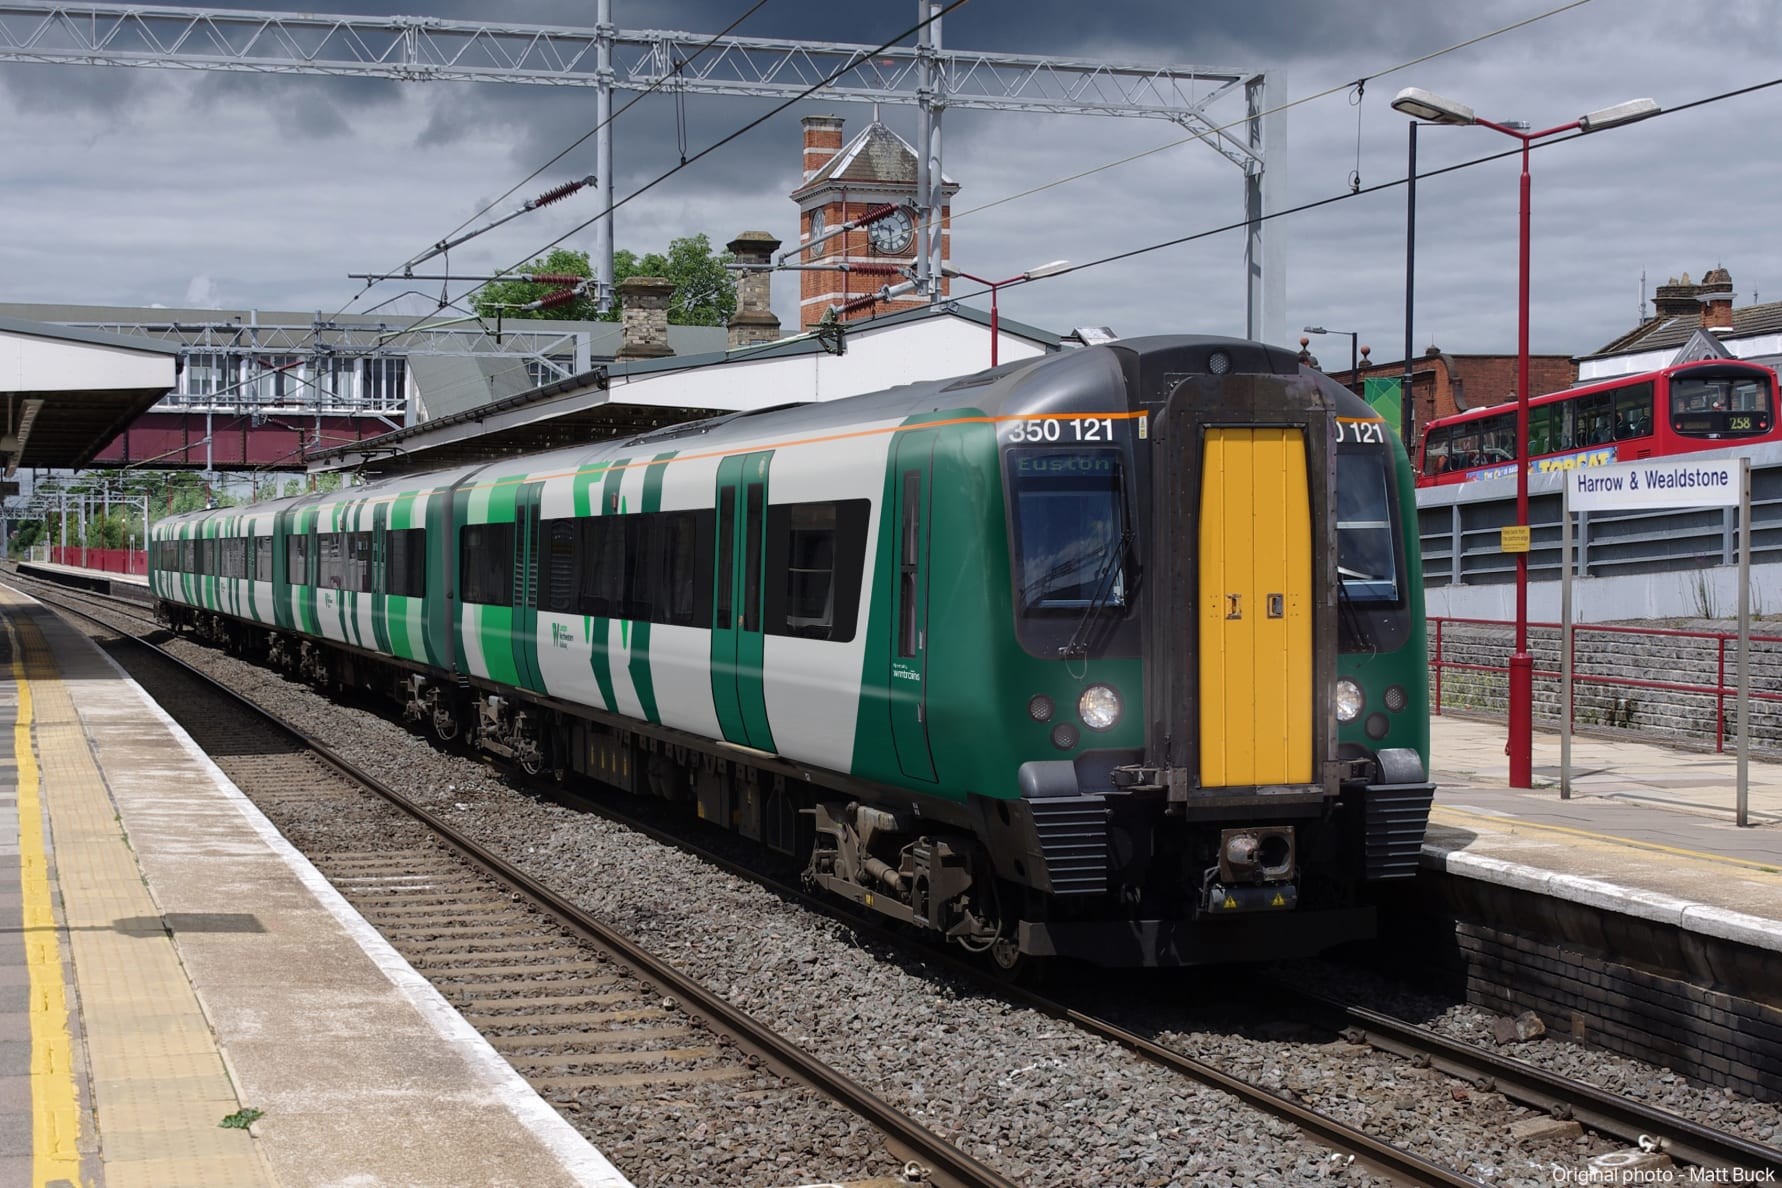 London Northwestern brand being brought back to the UK Rail Network